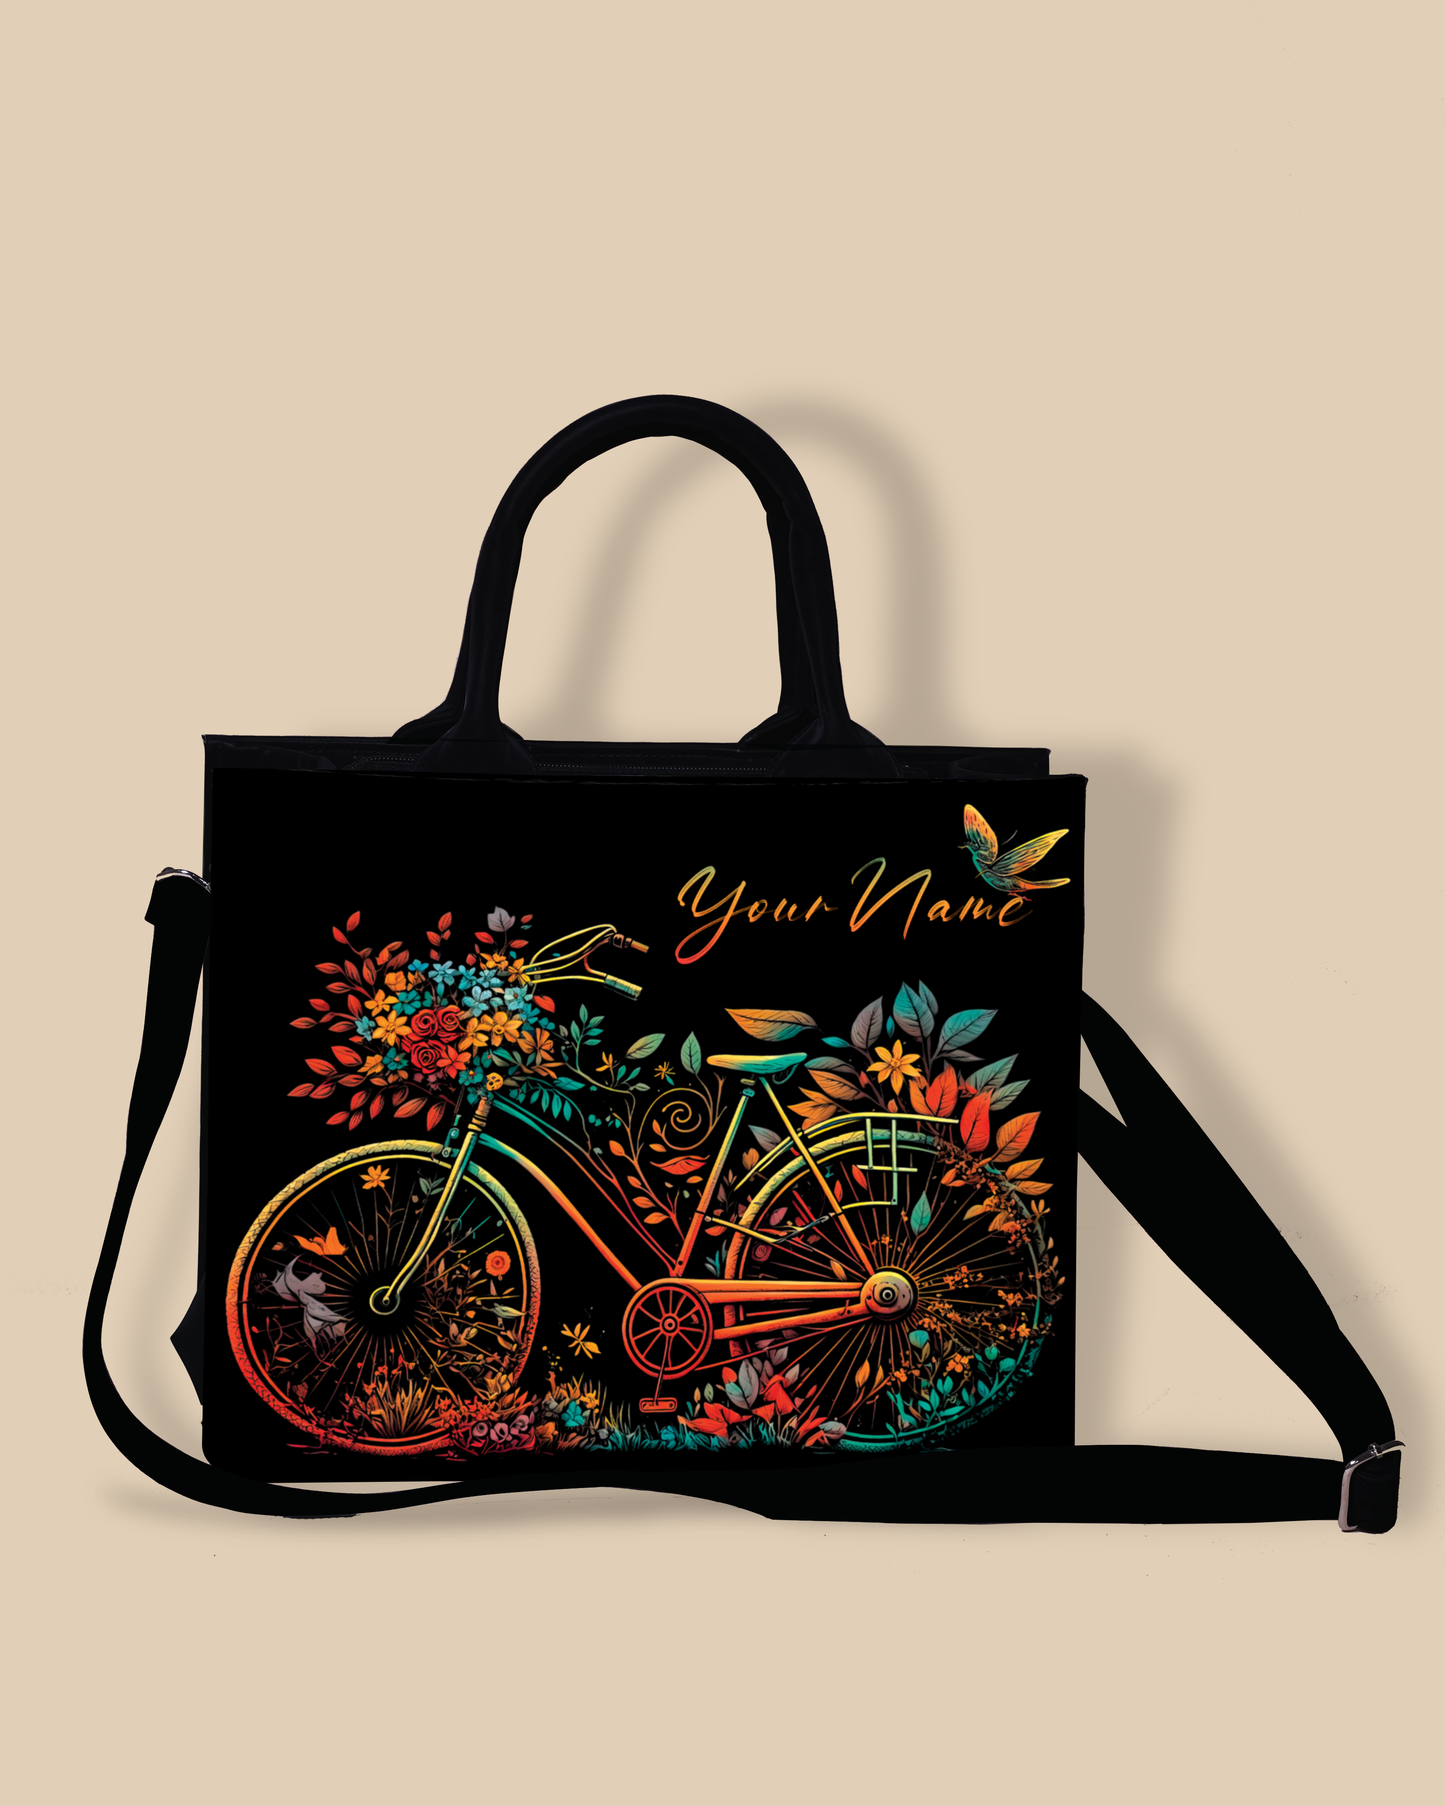 Customized small Tote Bag Designed With Growing Nature On Colorful Bicycle